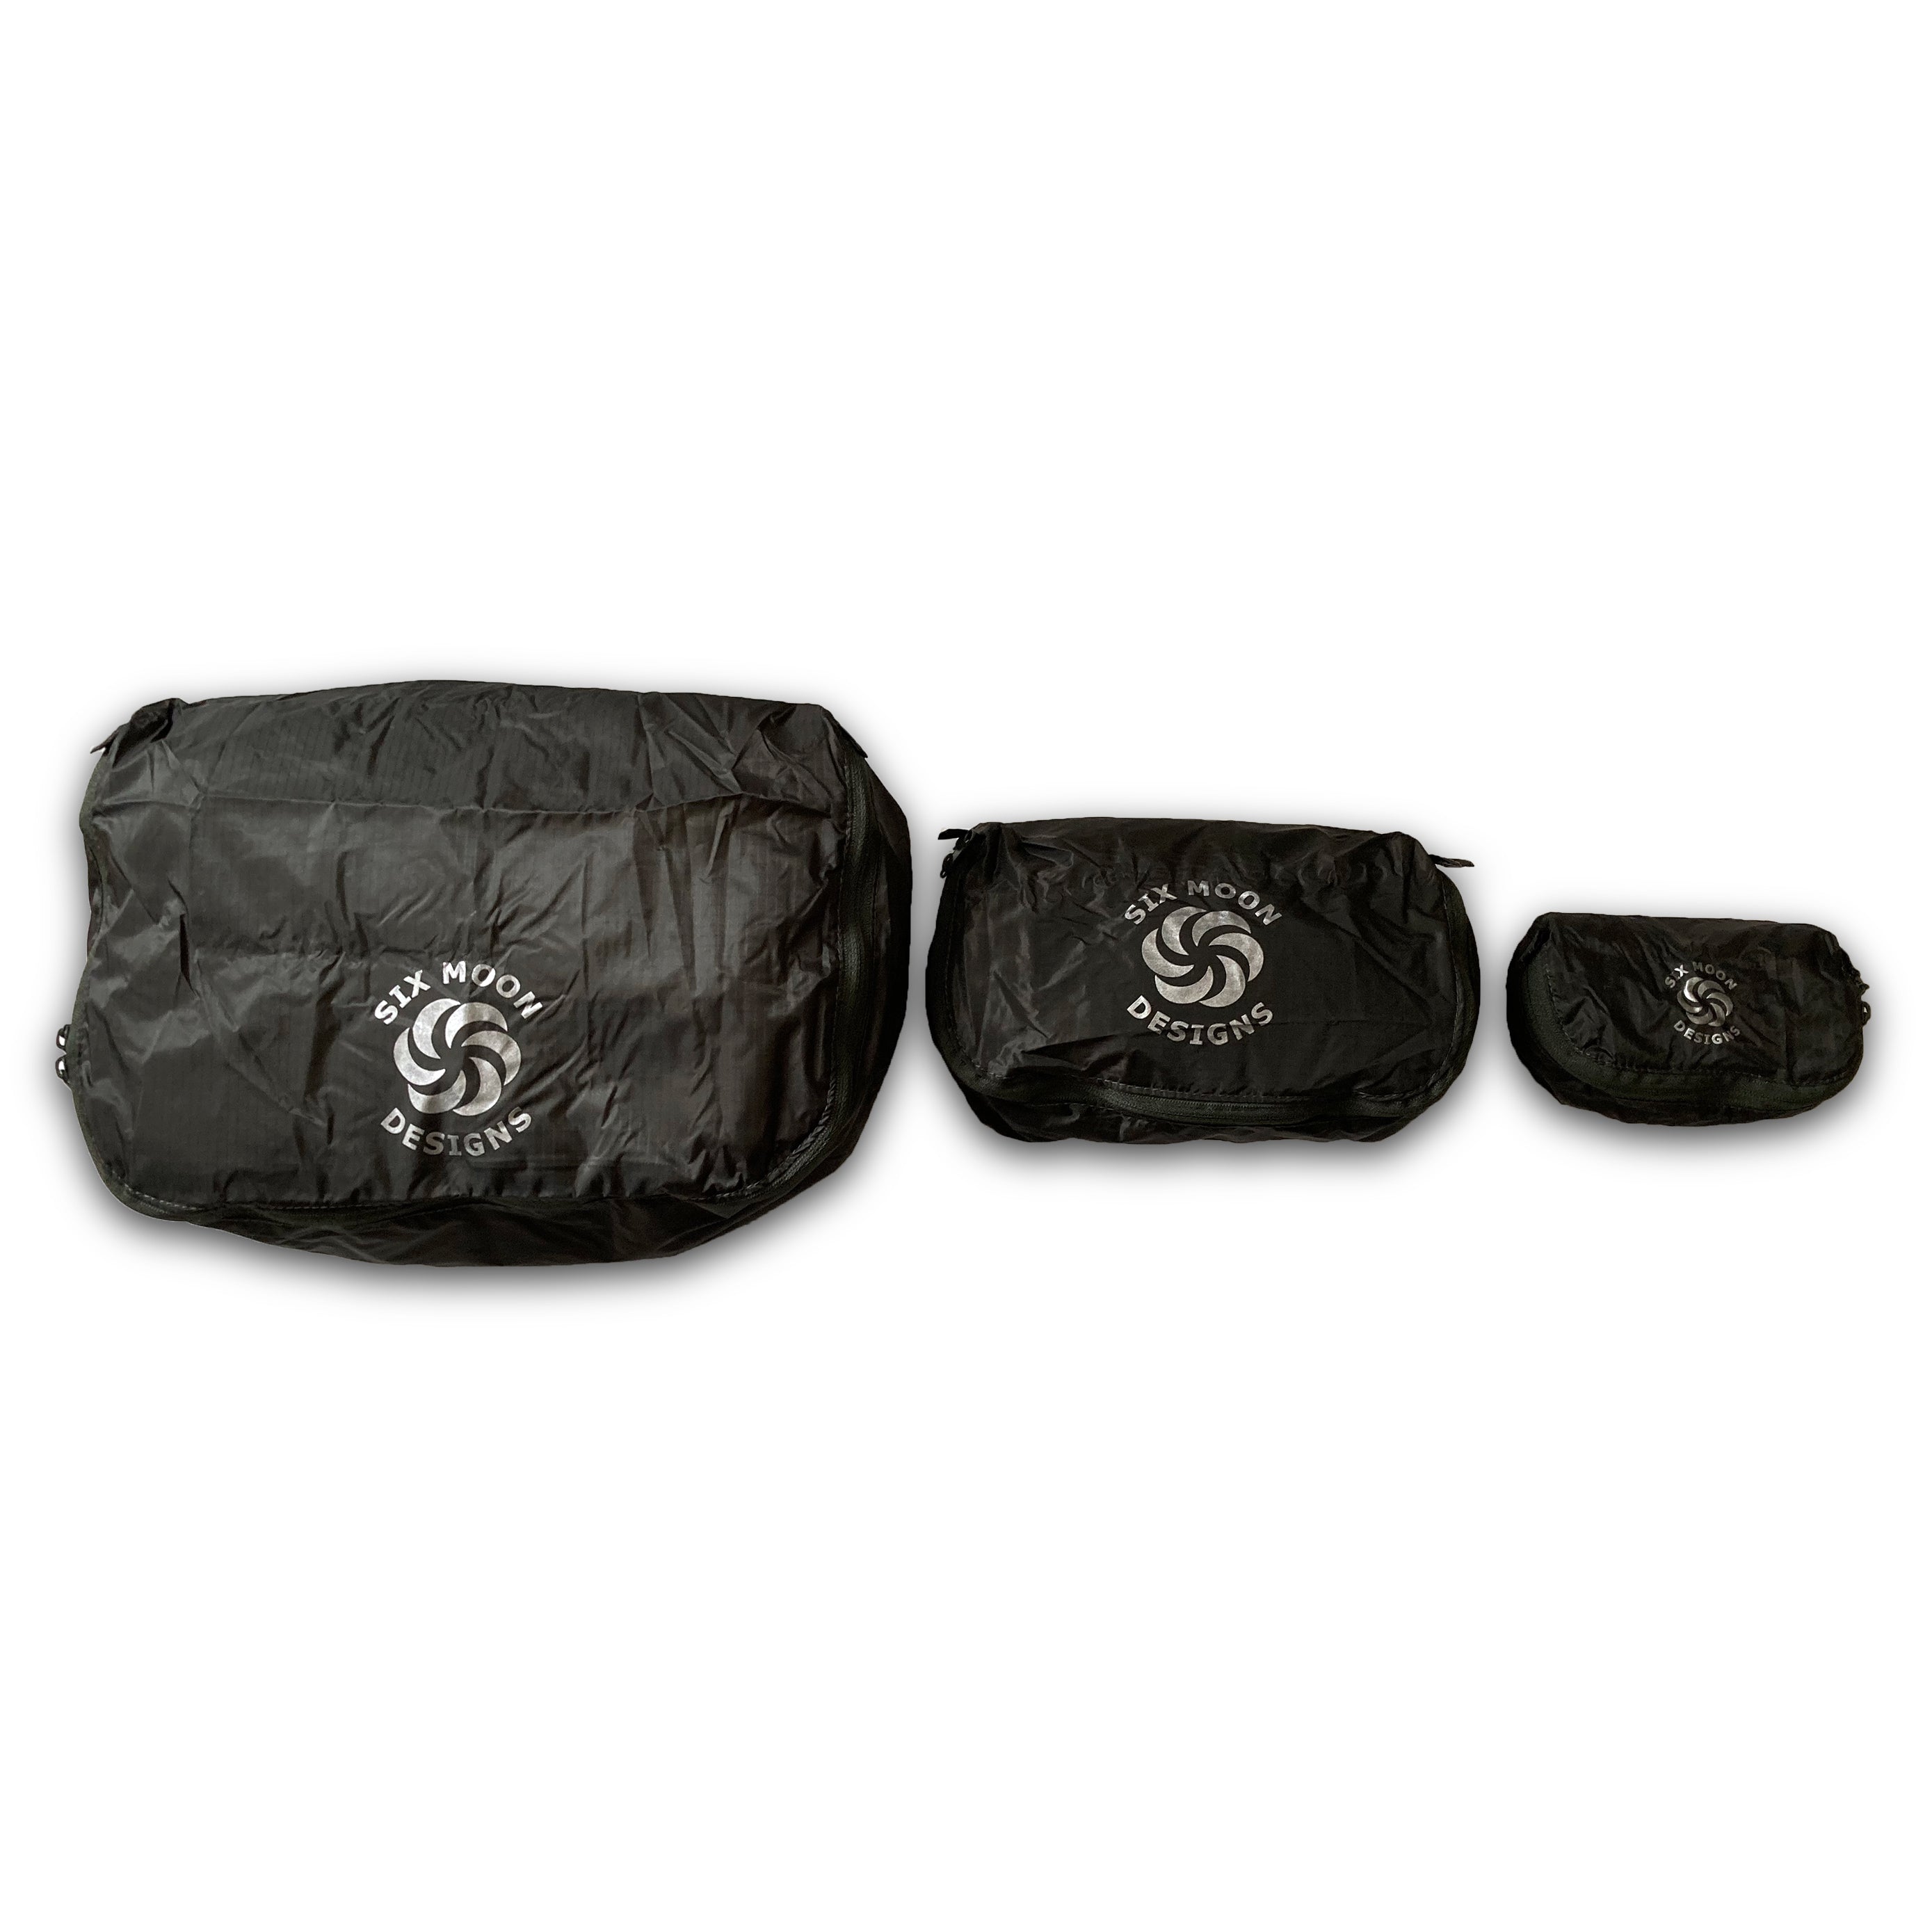 Carbon Six Moon Designs Pack Pod stuff sacks in all three sizes side by side